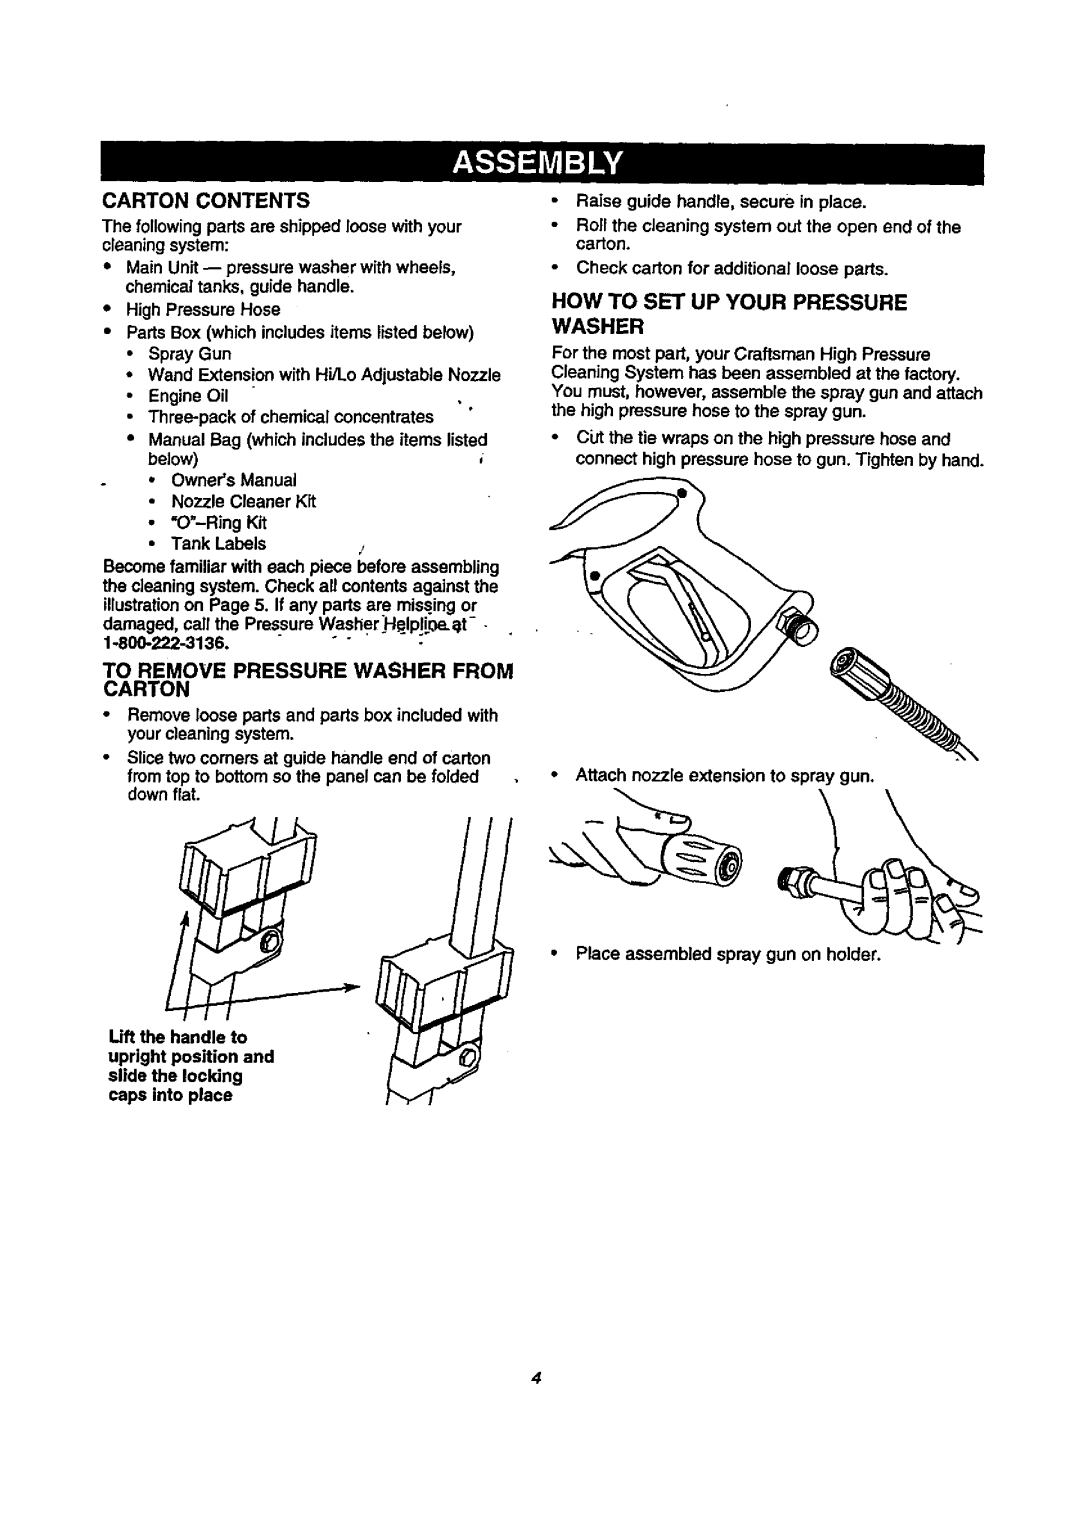 Craftsman 580.768020 manual How To Set Up Your Pressure Washer, Carton Contents, To Remove Pressure Washer From Carton 